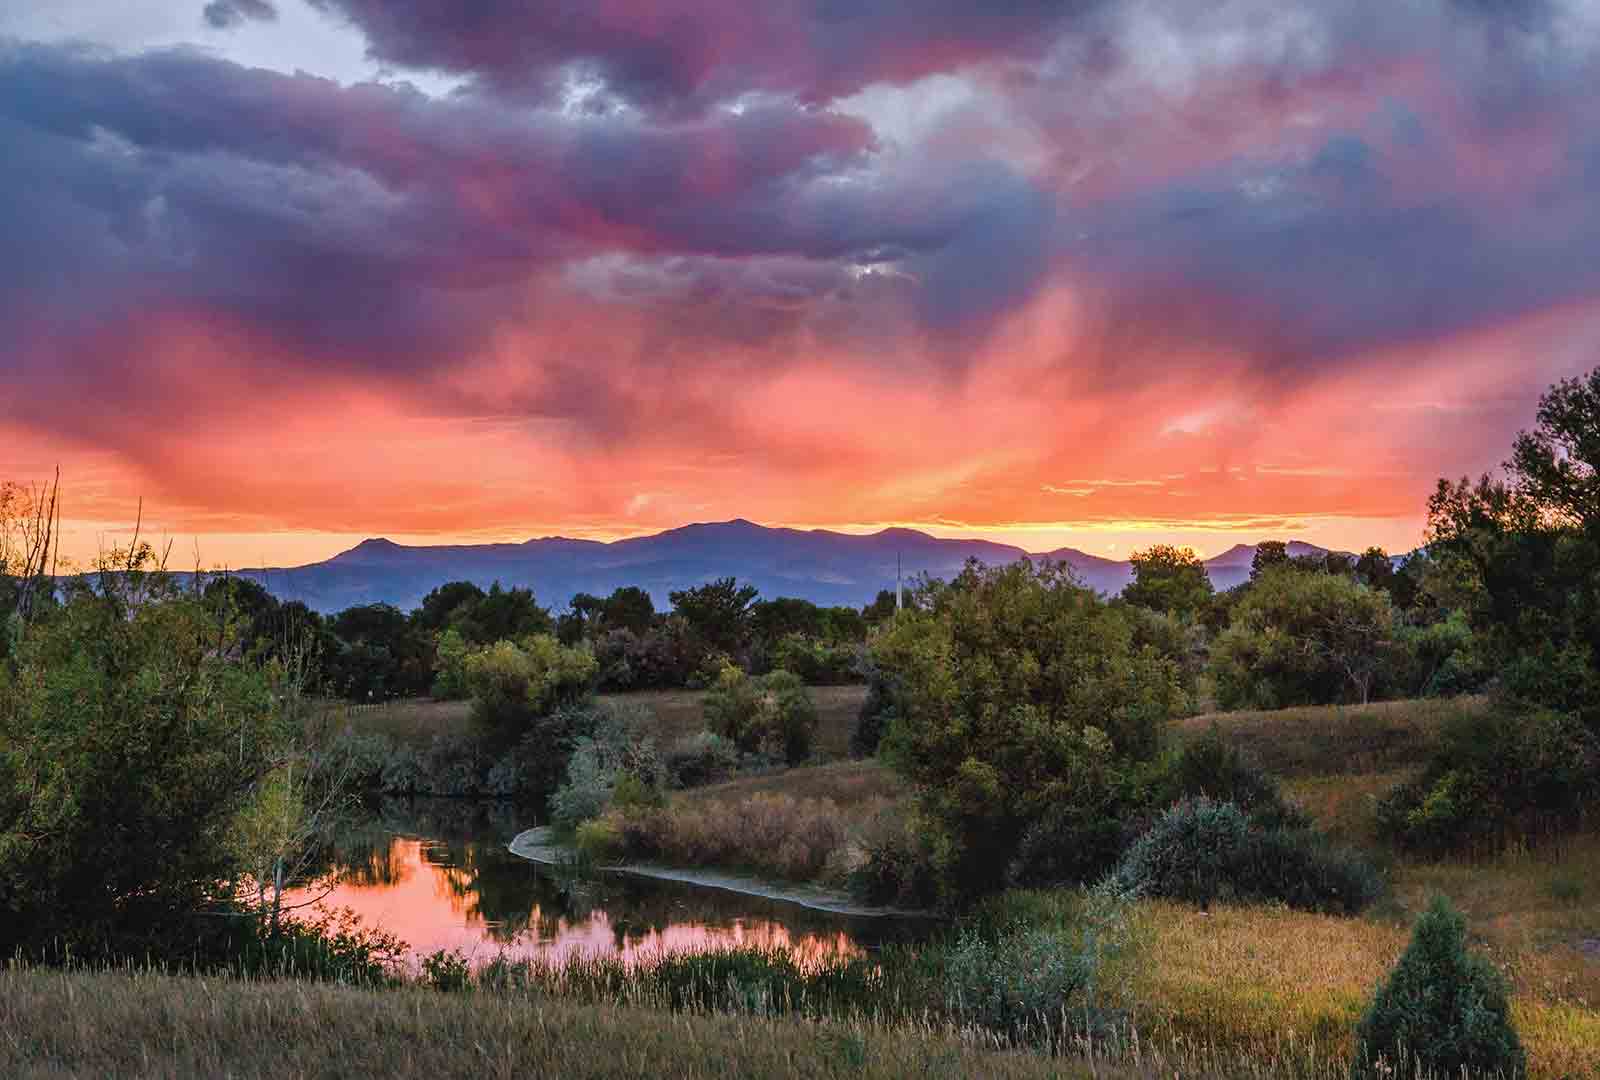 Sunset at Majestic View Nature Center in Arvada, CO